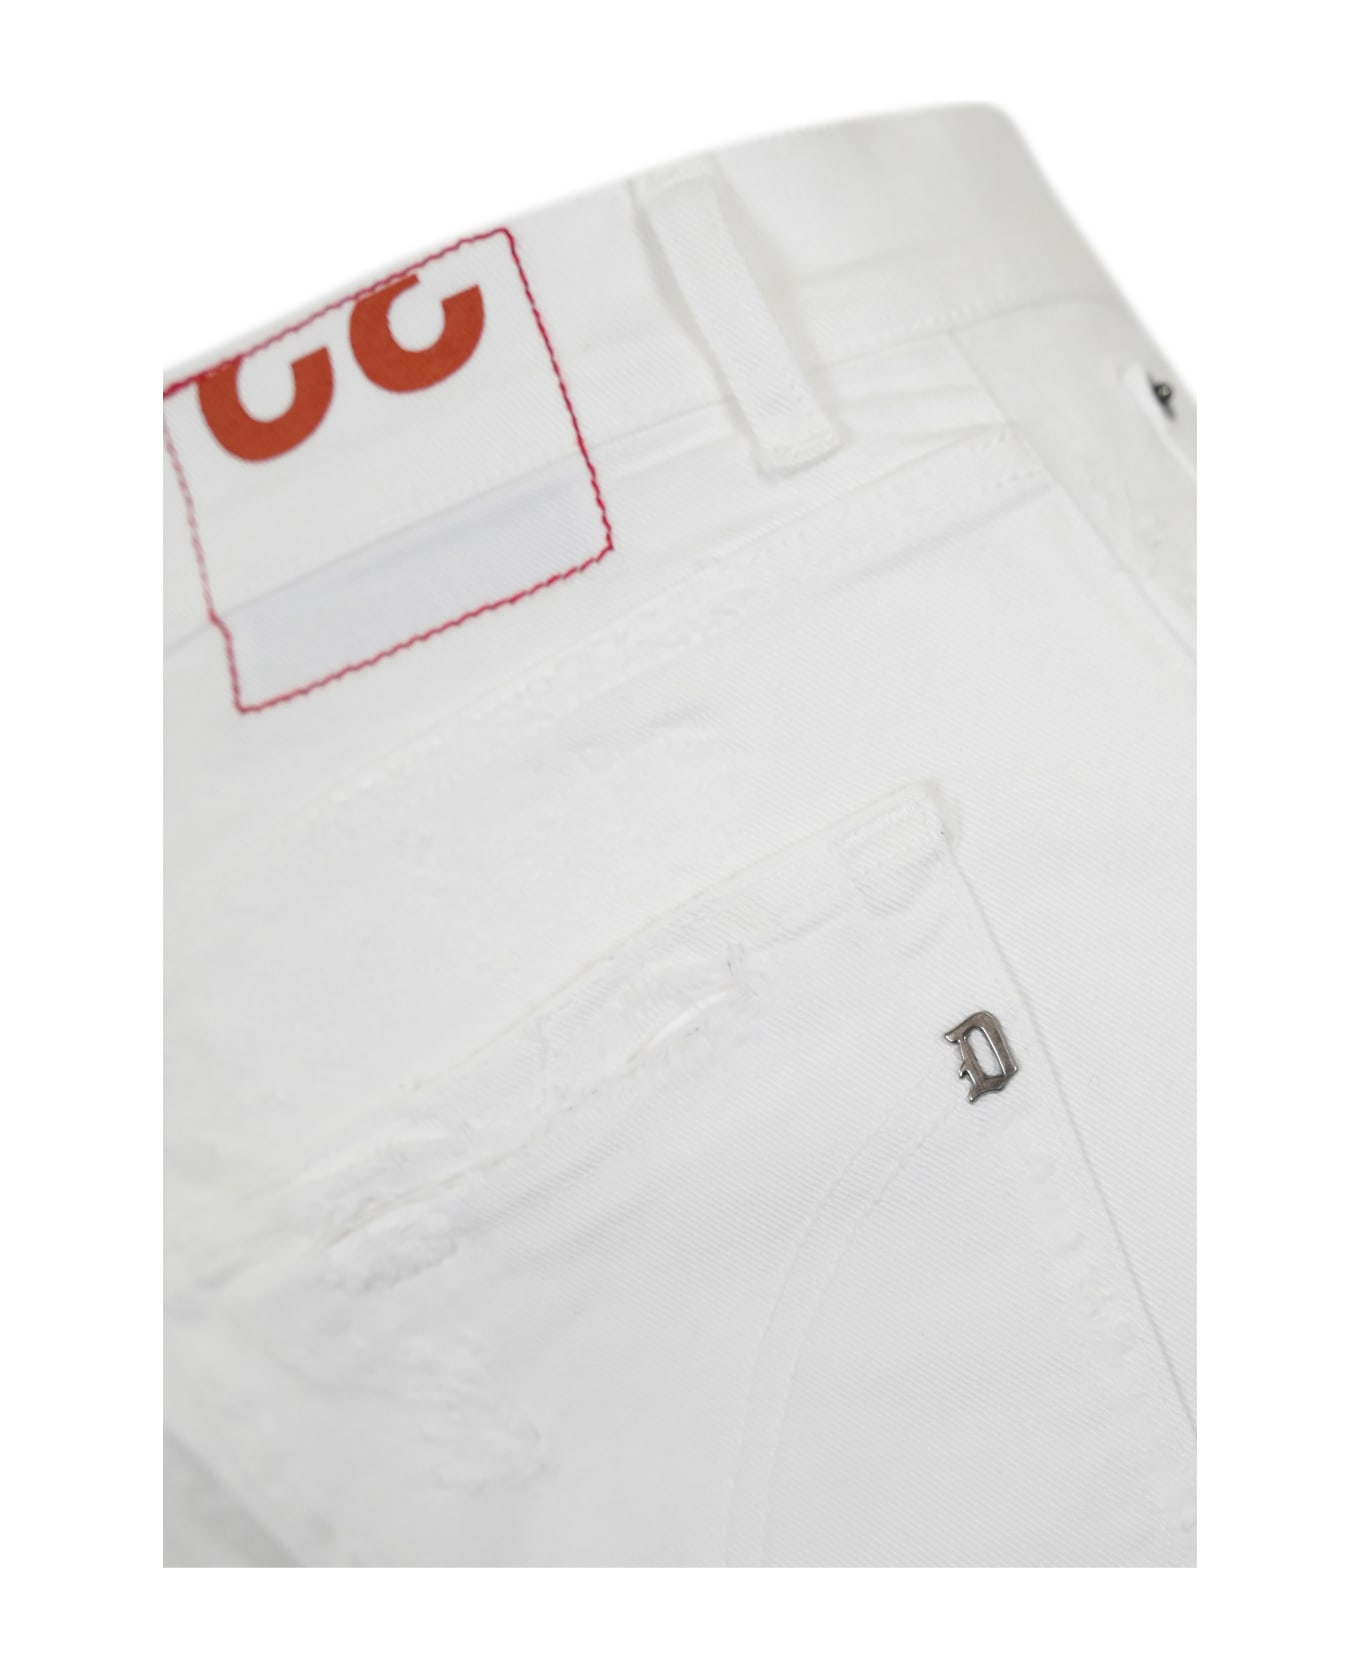 Dondup Dian Carrot Jeans In Bull Stretch - White ボトムス